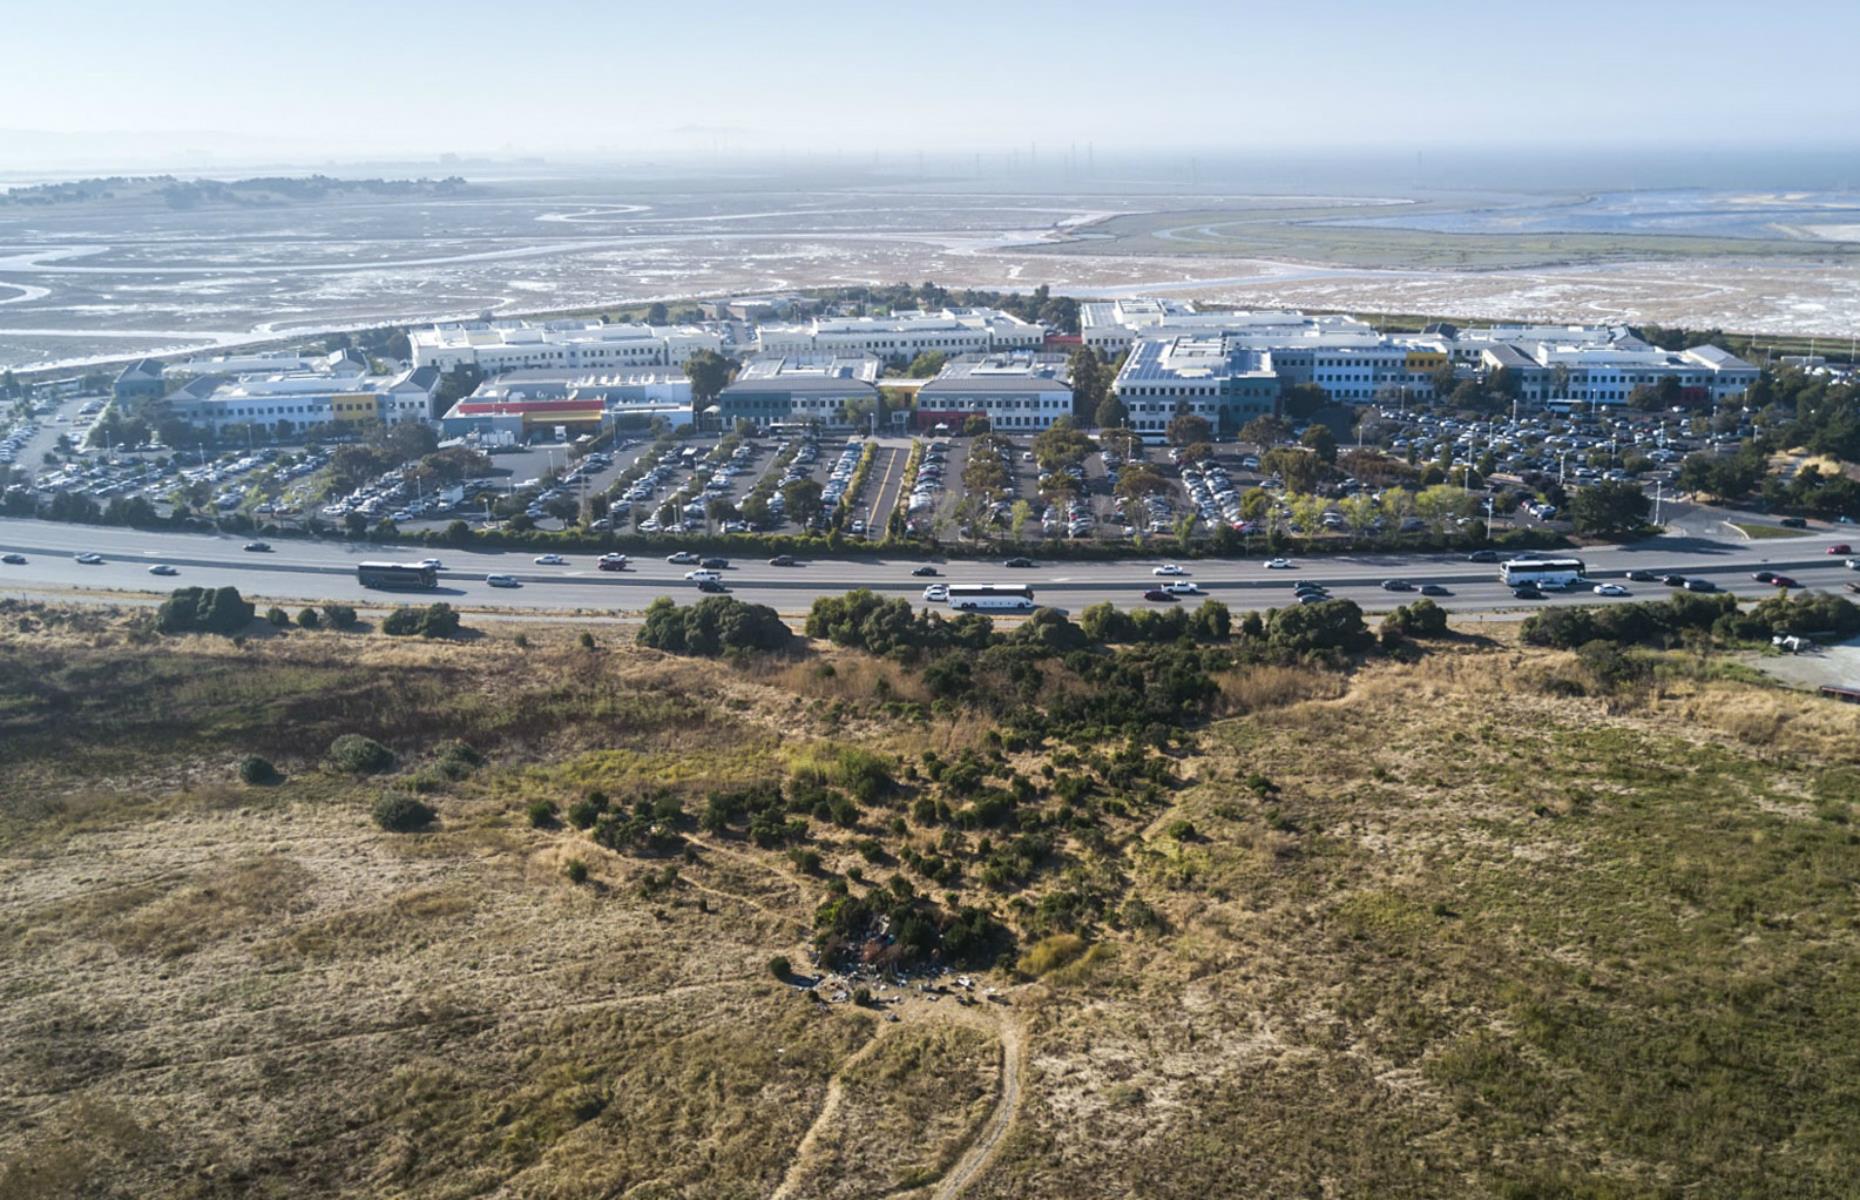 Silicon Valley has a problem with poverty. It may be the home to global multimillion-dollar companies, but it is far from a perfect scene. In this image in the foreground a patch of tents can be spotted sitting just across from Facebook's headquarters, a company currently valued at $725.5 billion (as of 17 September 2020).